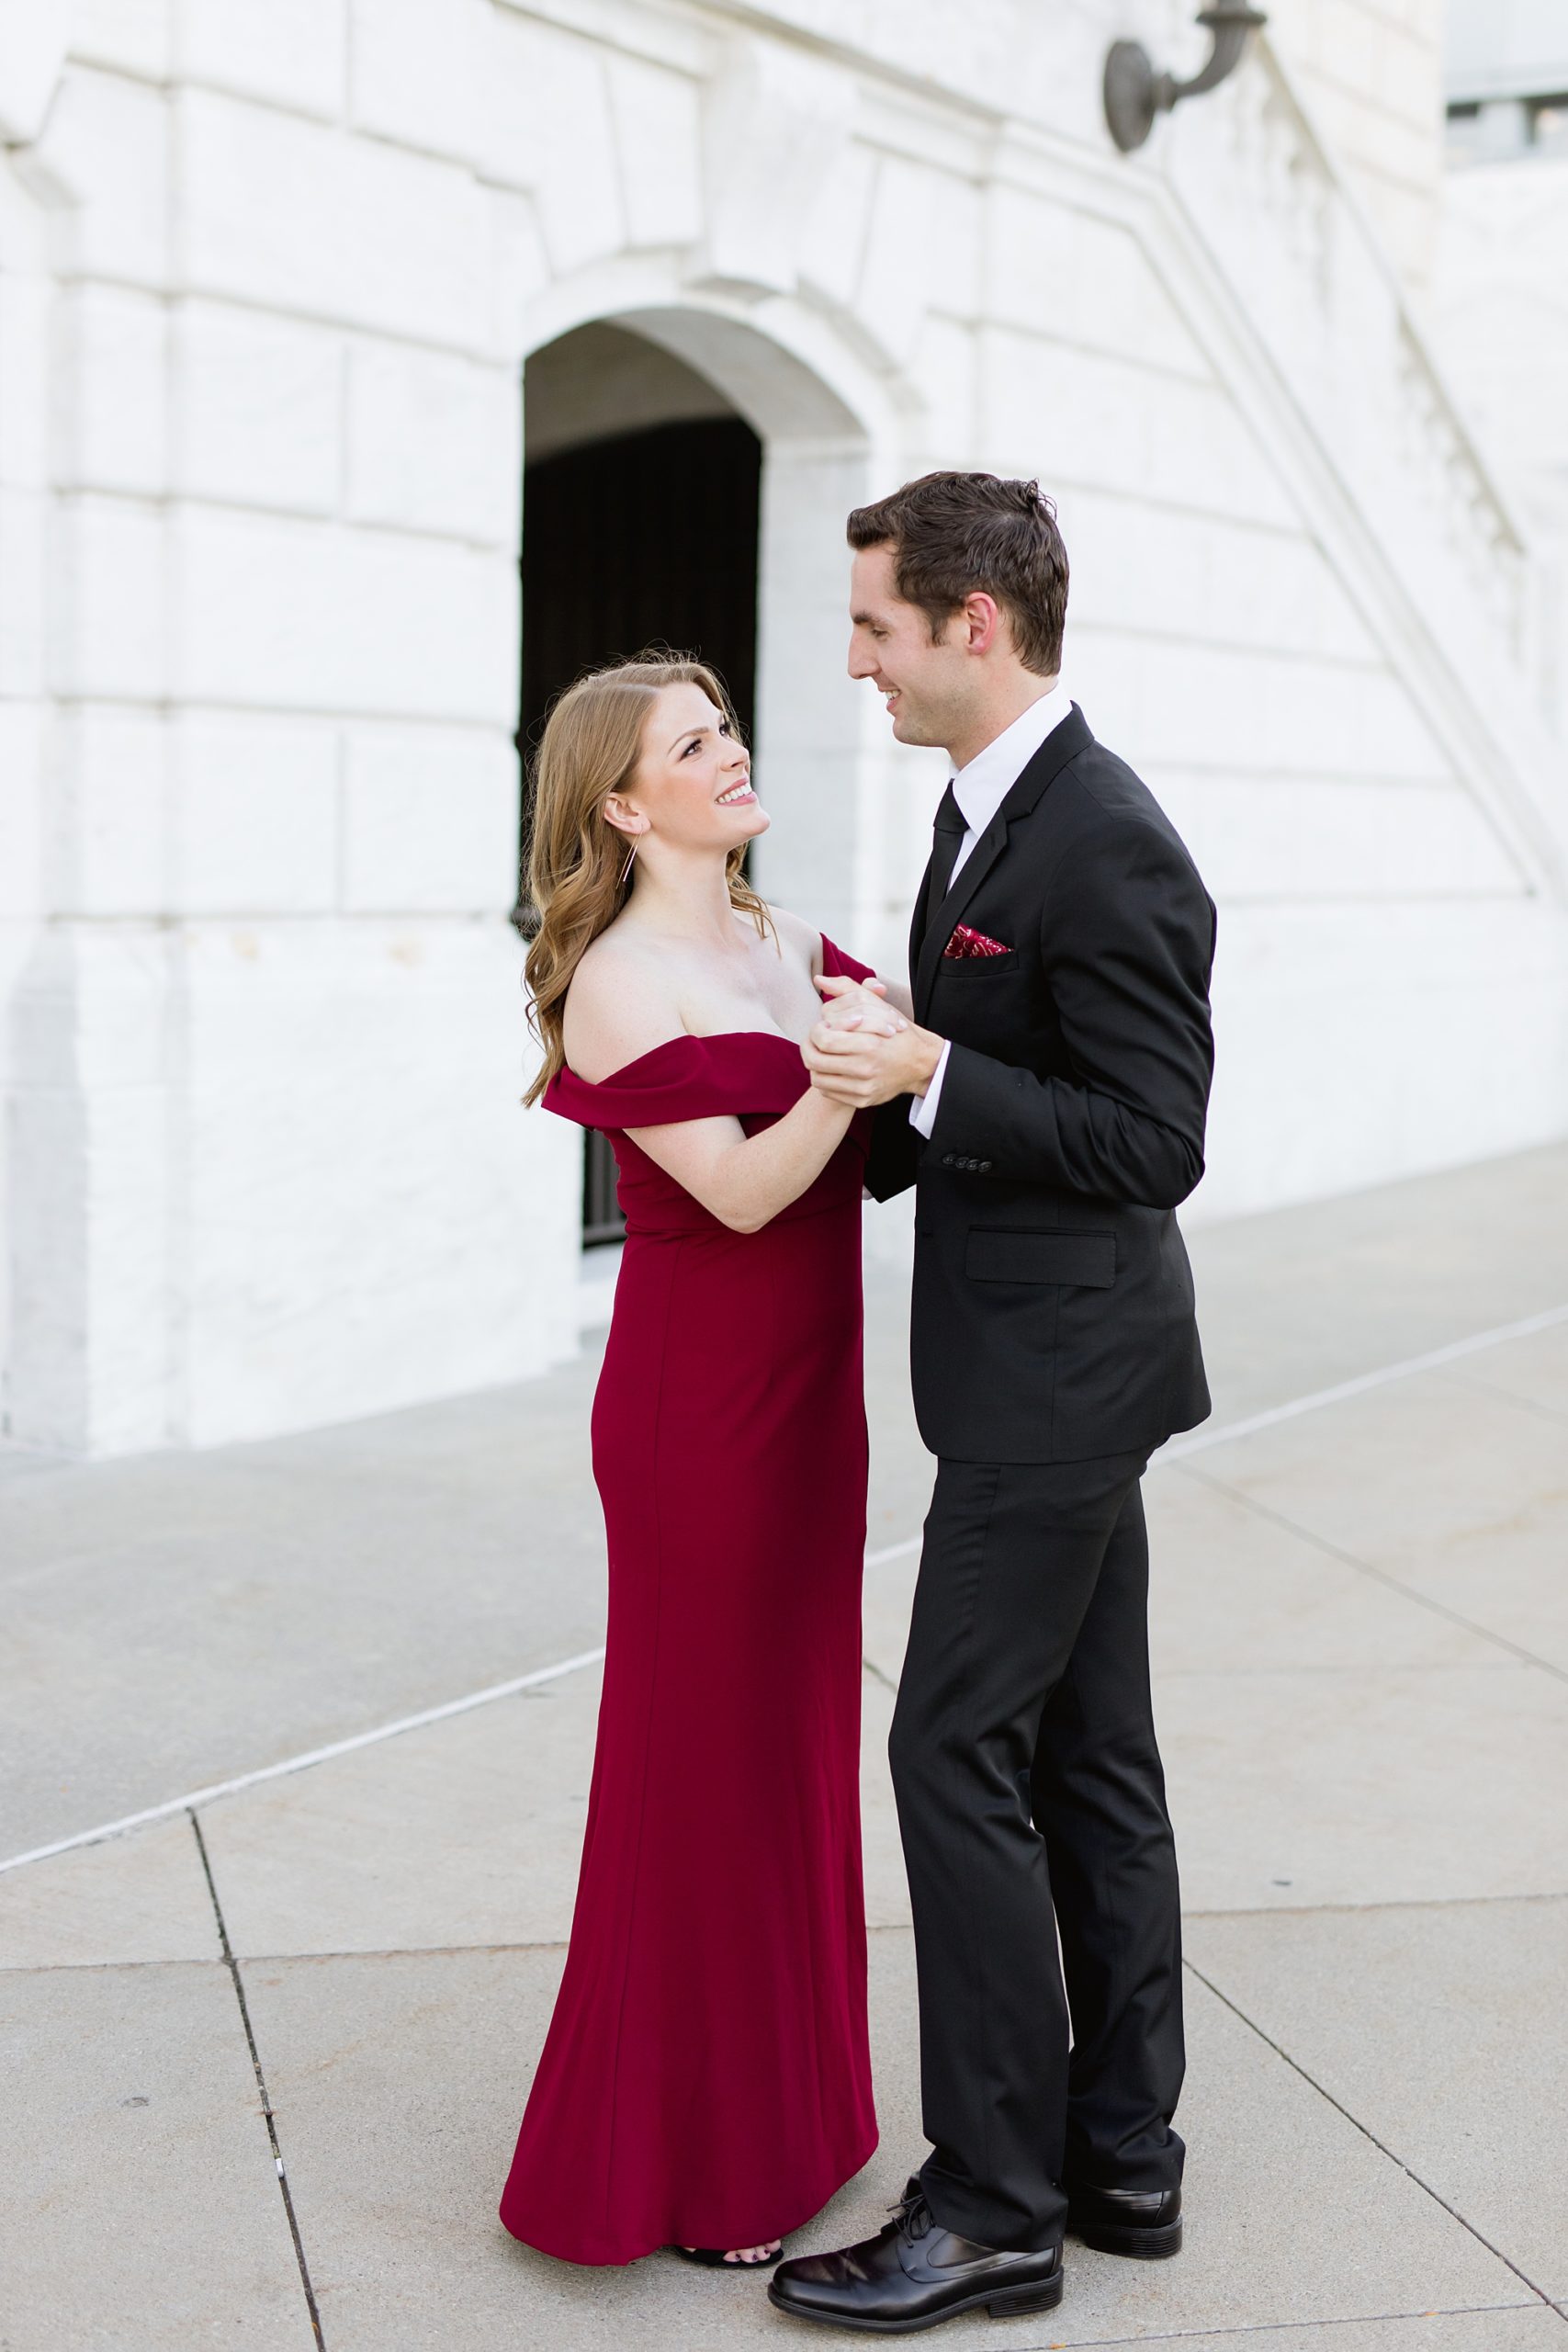 Formal outfits for engagement photos | Downtown Detroit | Breanne Rochelle Photography